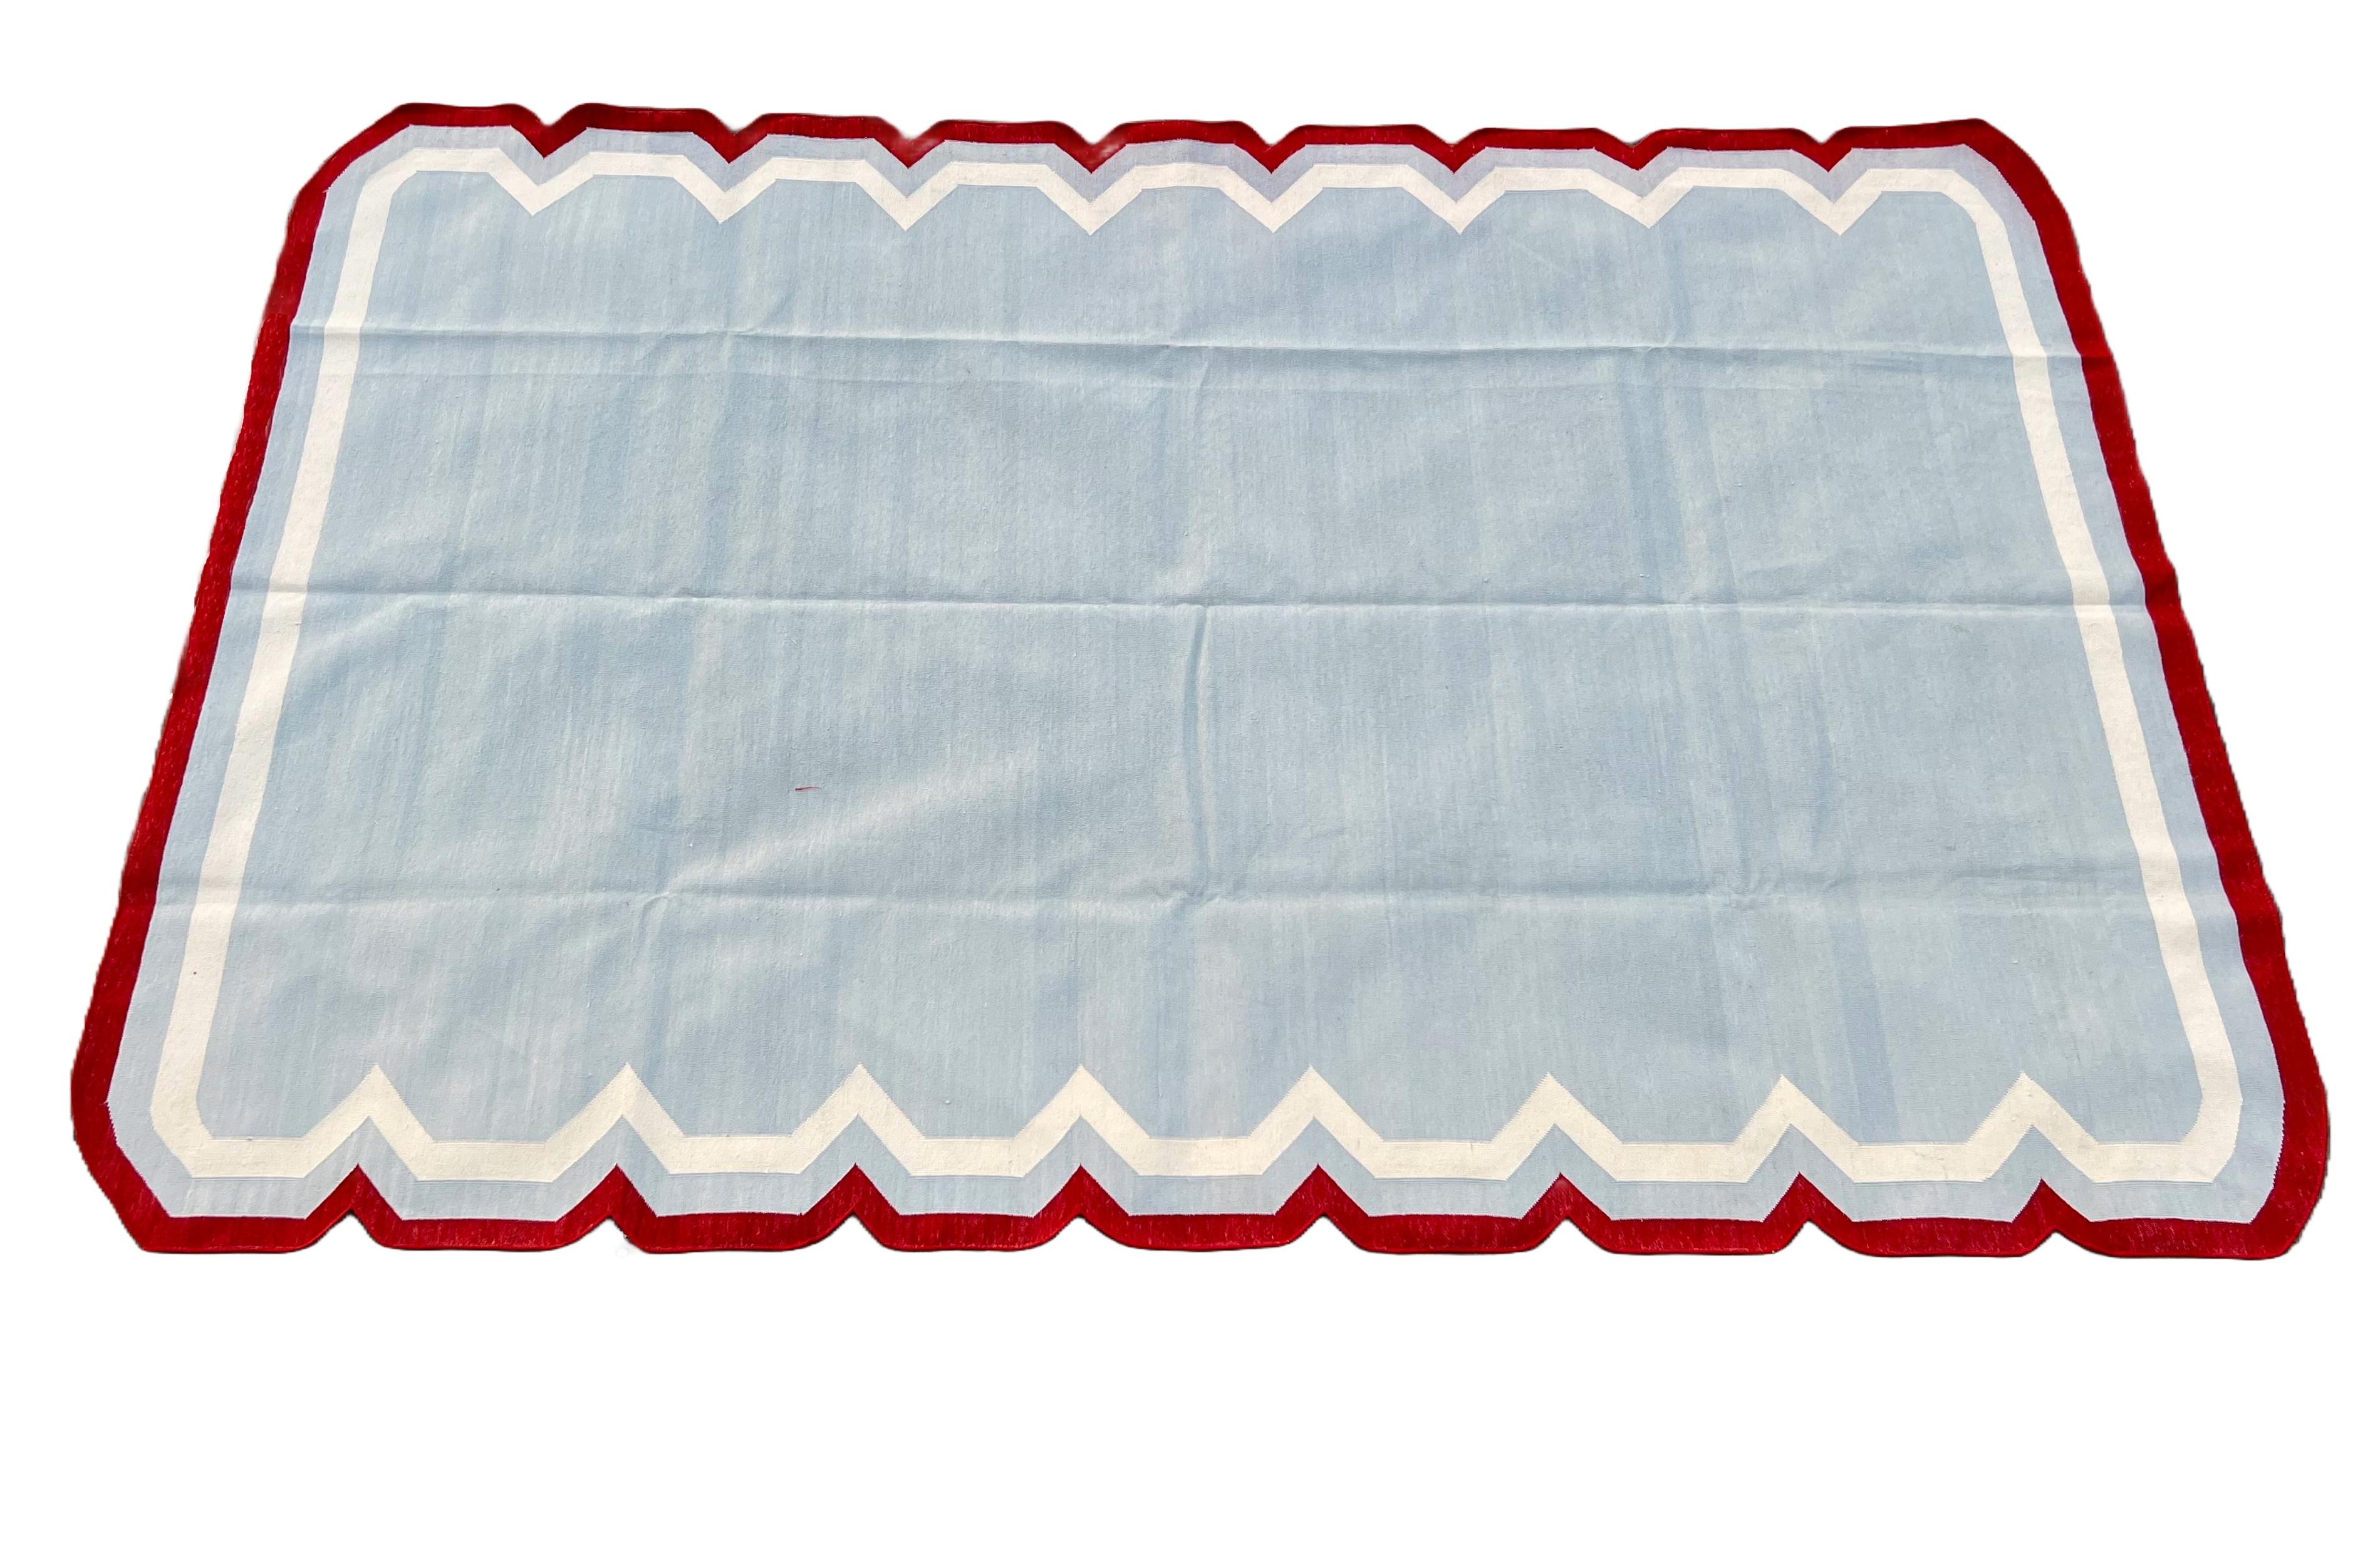 Cotton Vegetable Dyed Sky Blue, Cream And Terracotta Red Scalloped Striped Indian Dhurrie Rug- 5'x8' (150x240cm) 

These special flat-weave dhurries are hand-woven with 15 ply 100% cotton yarn. Due to the special manufacturing techniques used to